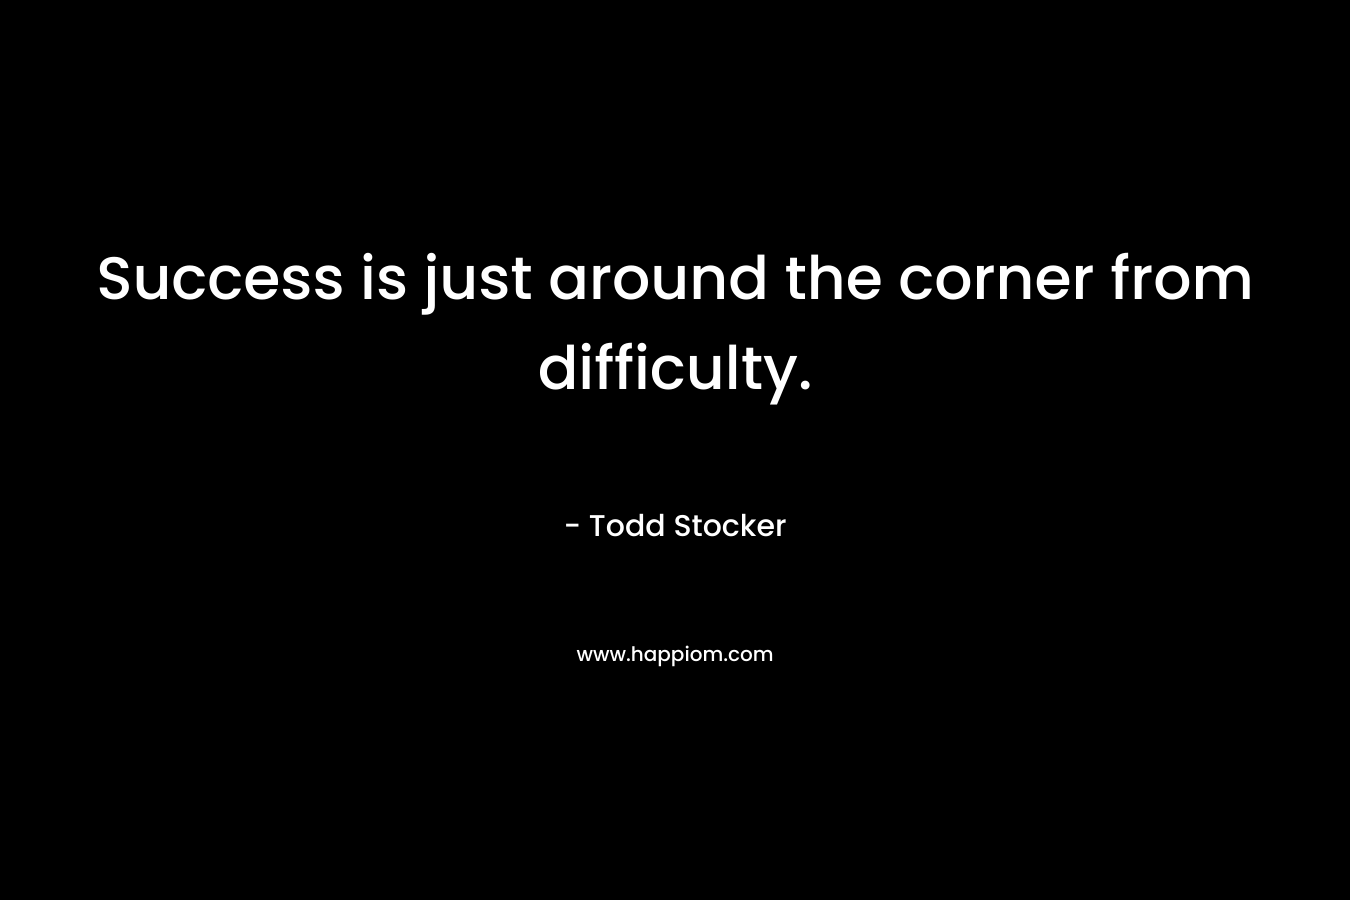 Success is just around the corner from difficulty.